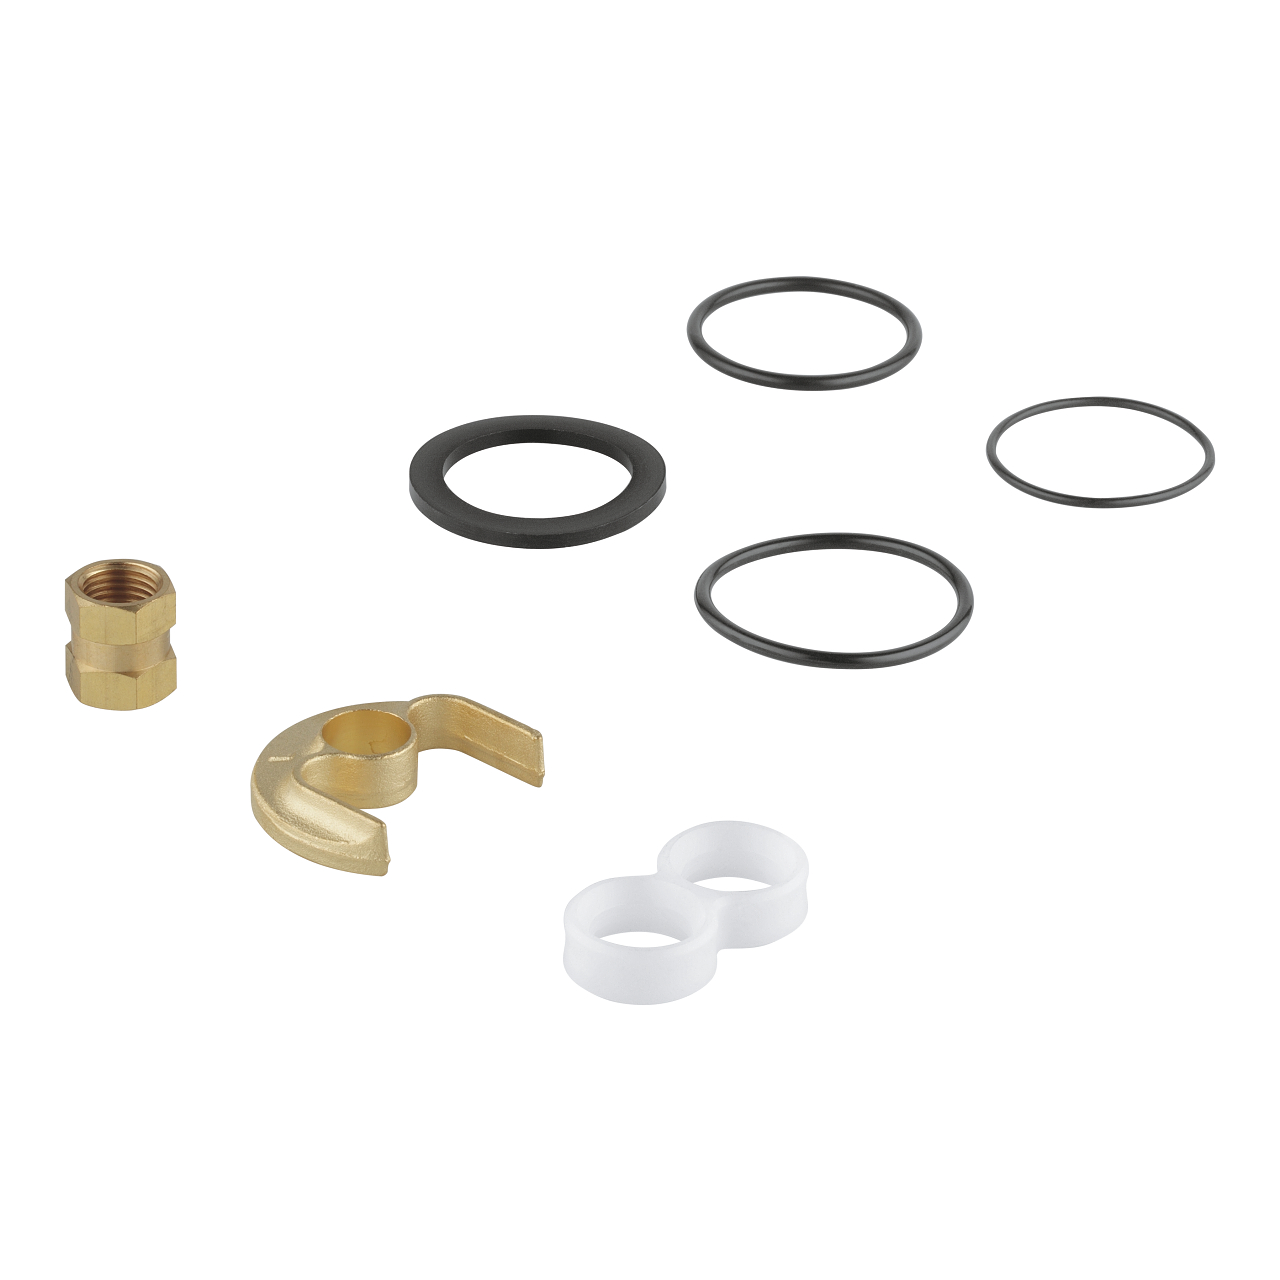 GROHE shank mounting kit